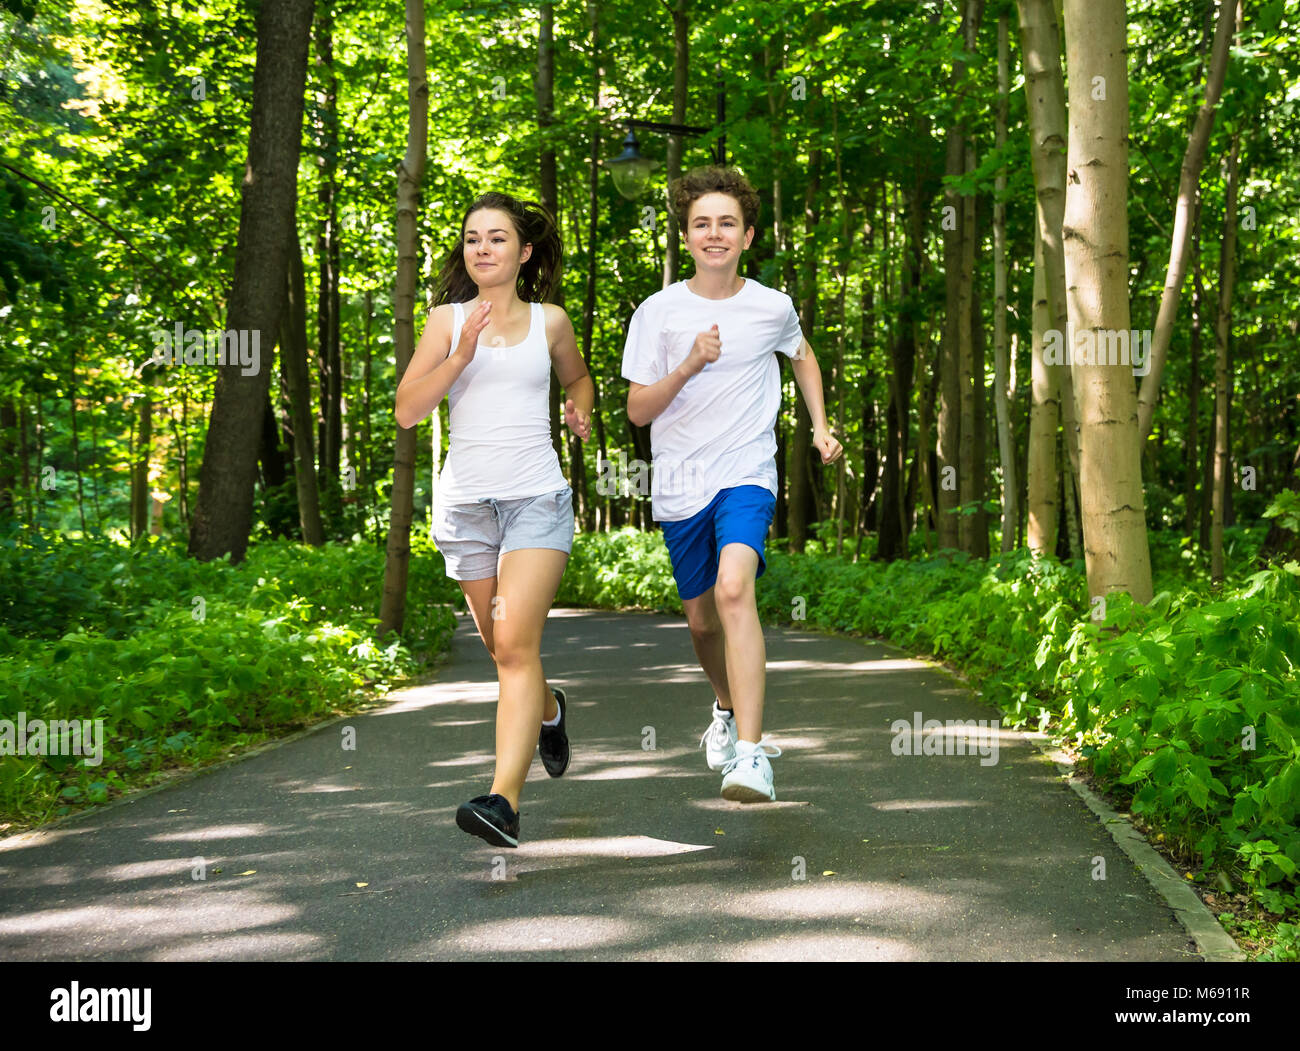 Teenage girl and boy running in park Banque D'Images